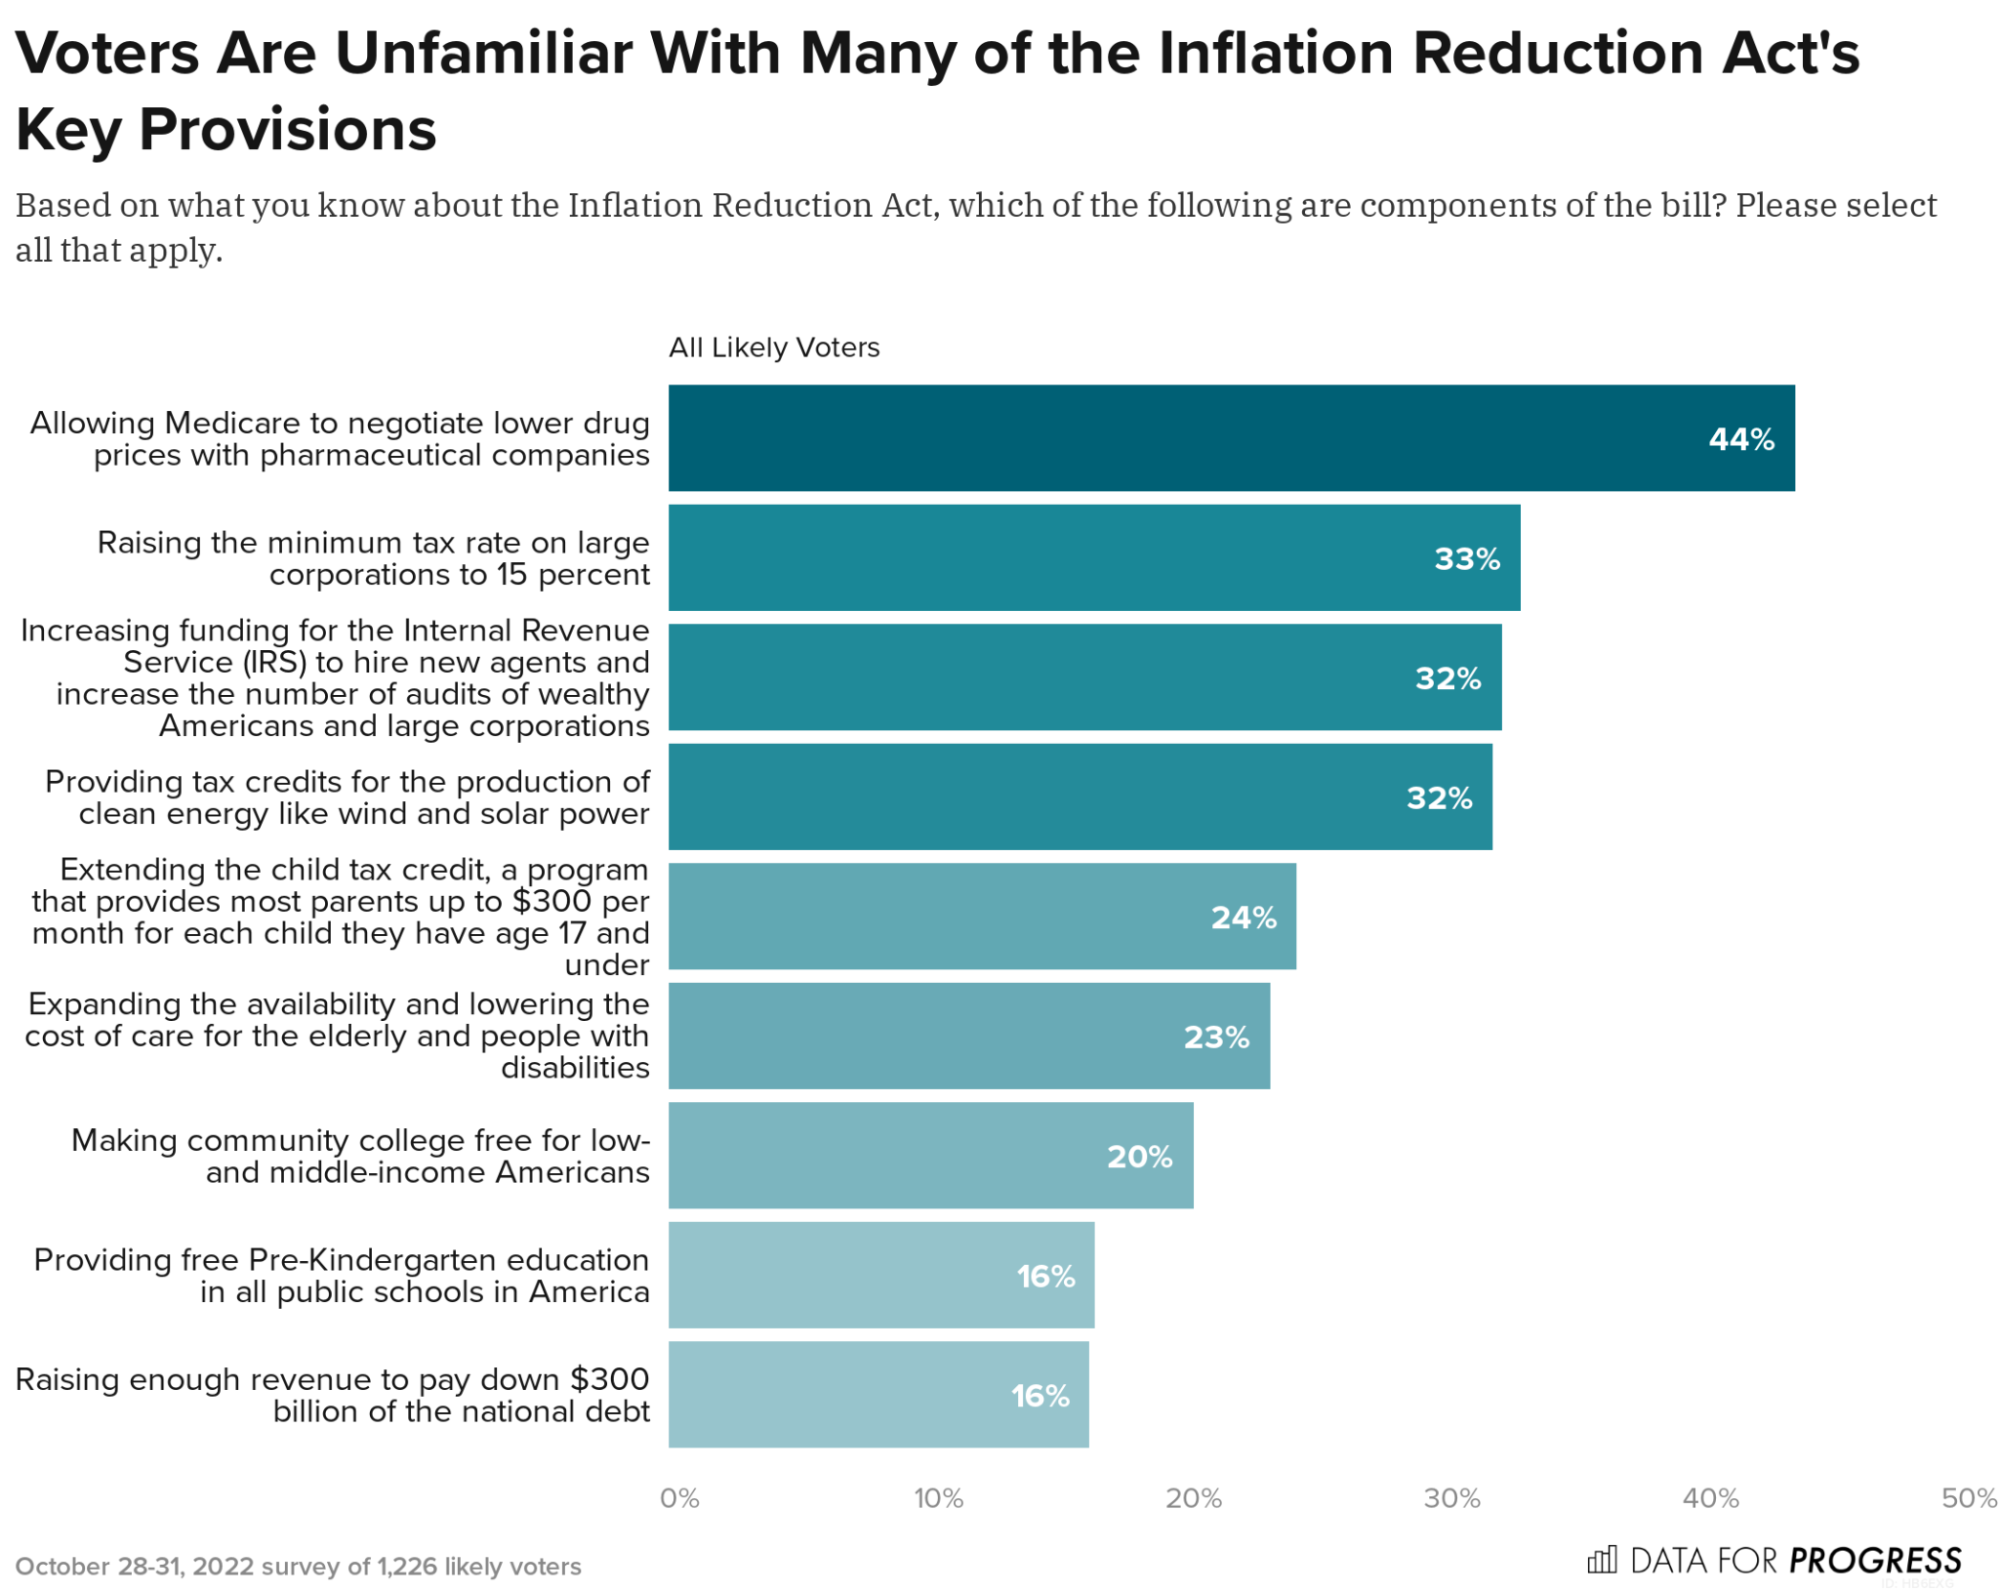 On the Inflation Reduction Act, Voters Have Heard Very Little